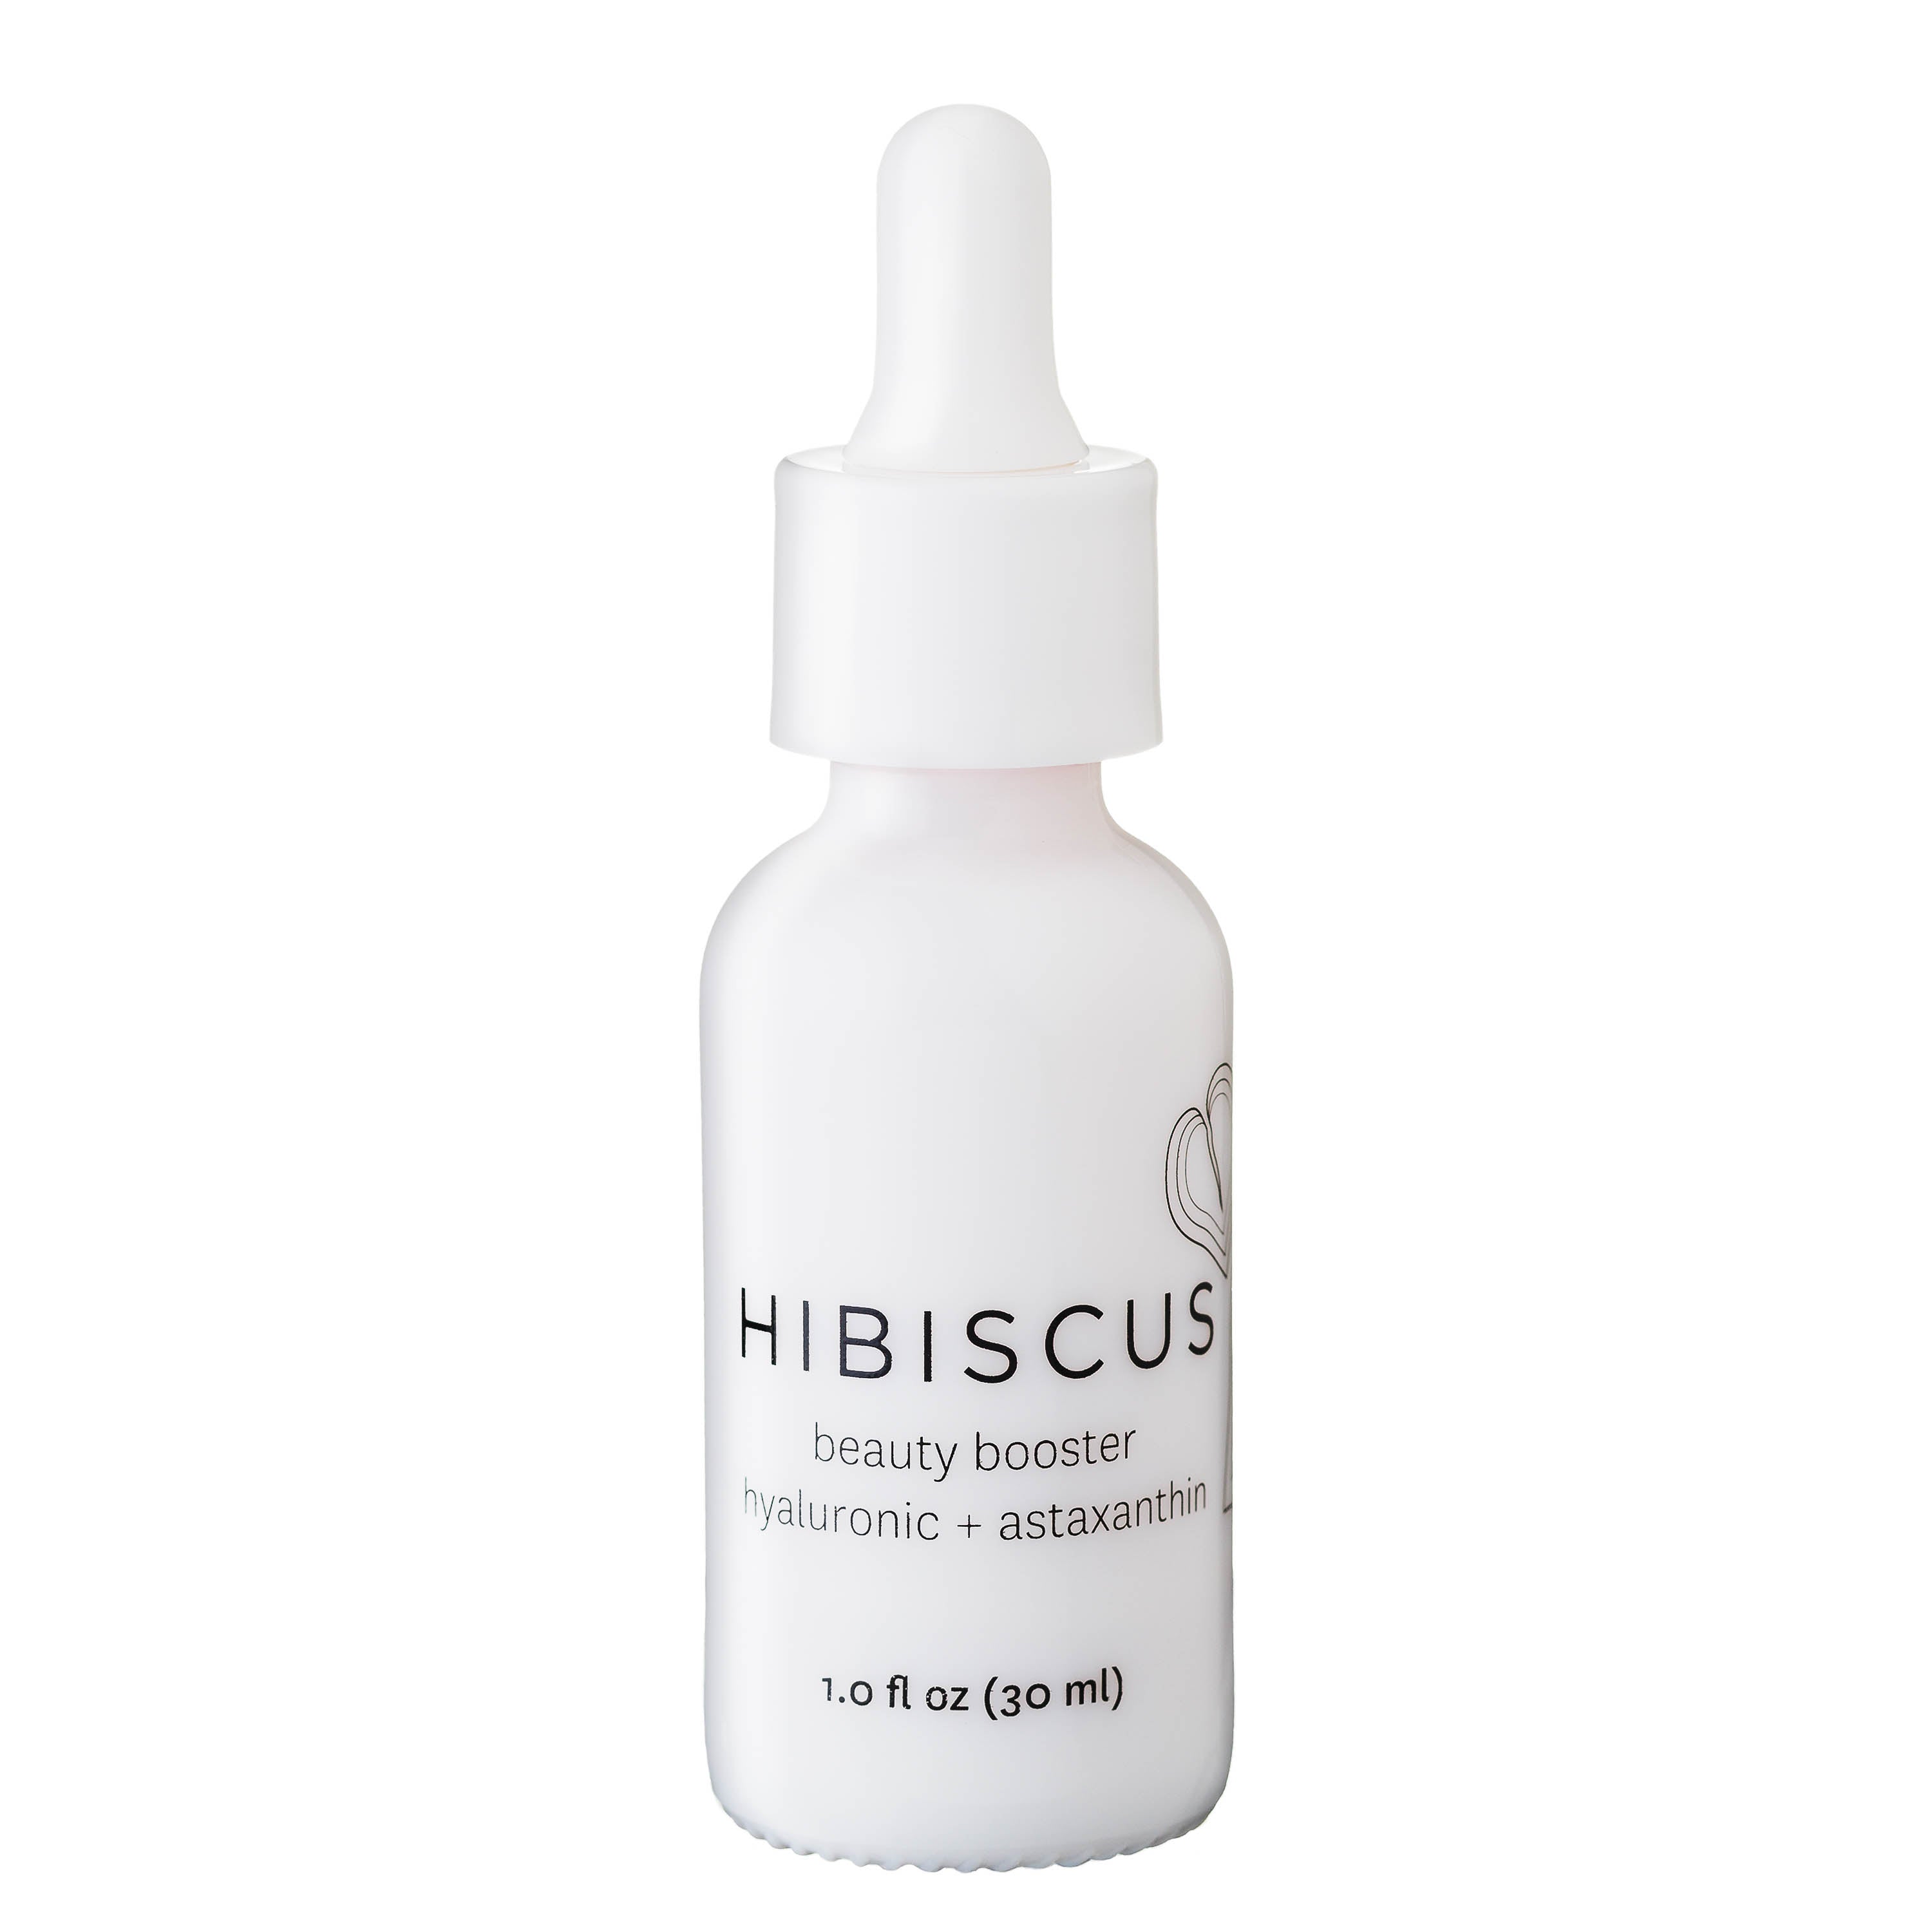 Hibiscus Beauty Booster with Hyaluronic + Astaxanthin - 1oz